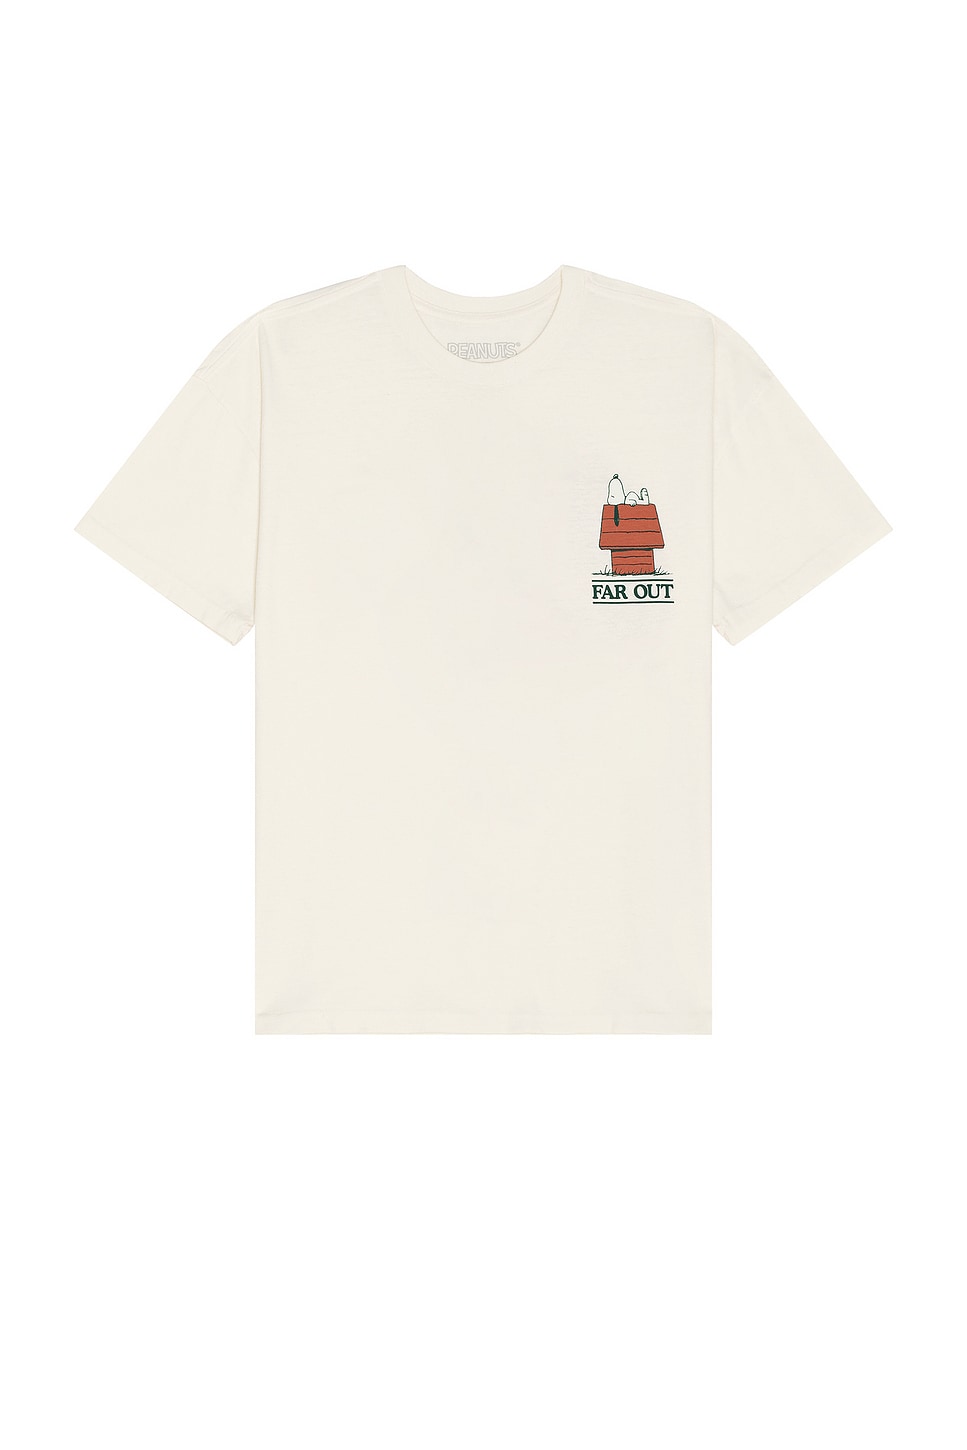 Shop Sixthreeseven Peanuts Far Out Tee In Sand